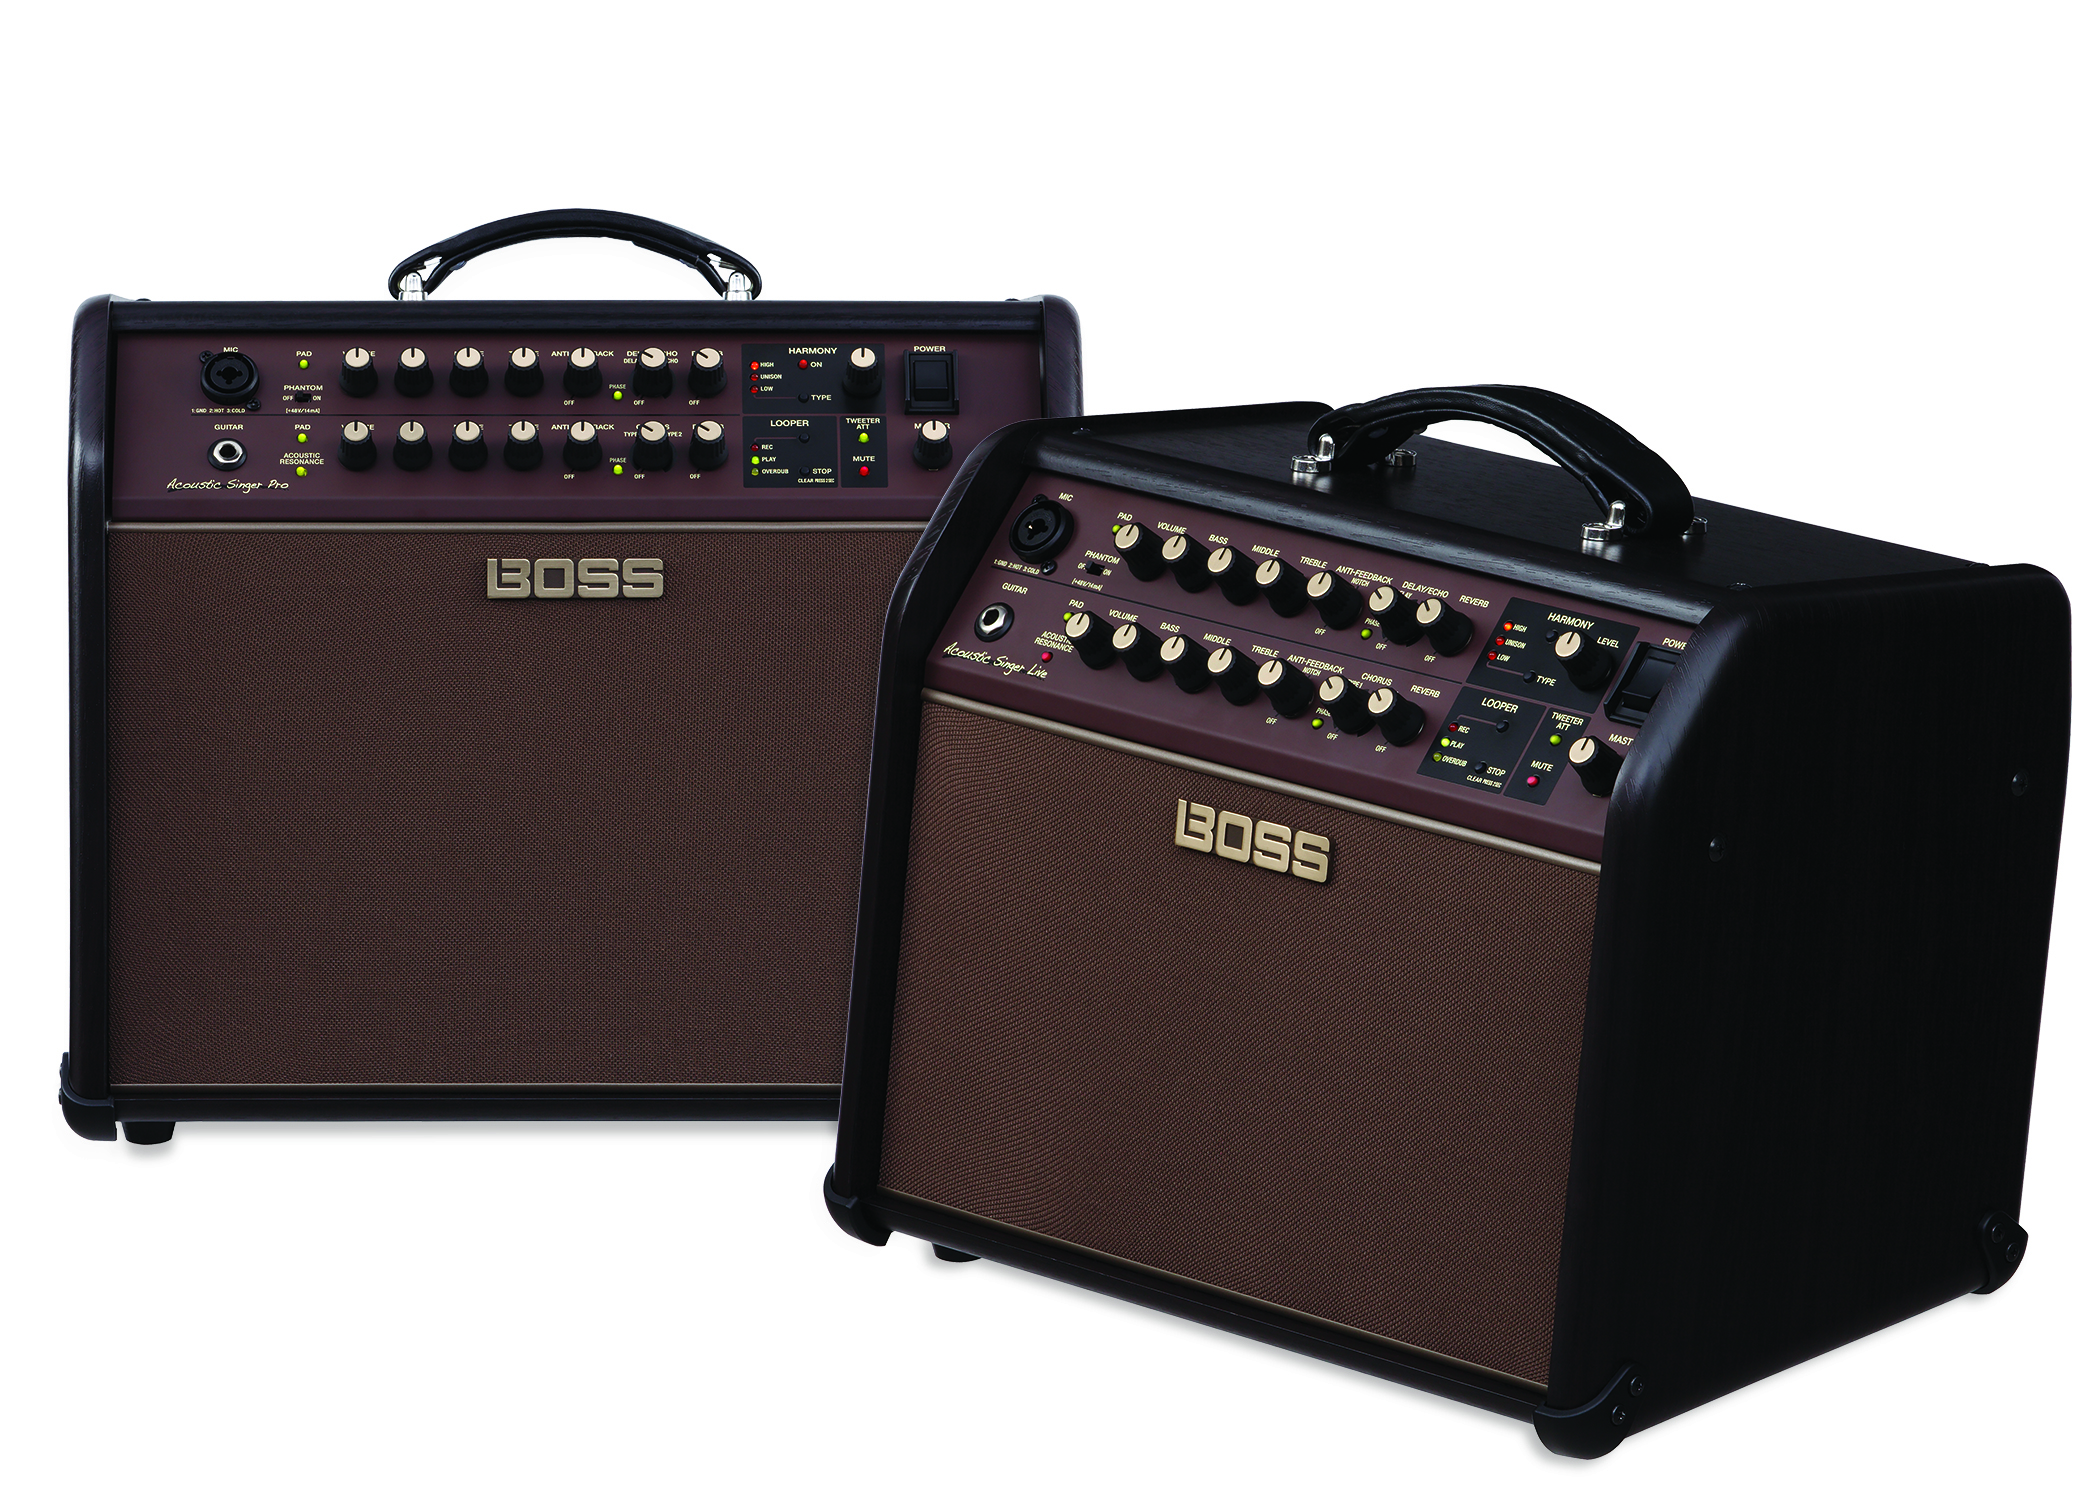 BOSS Introduces New Acoustic Singer Amplifier Series